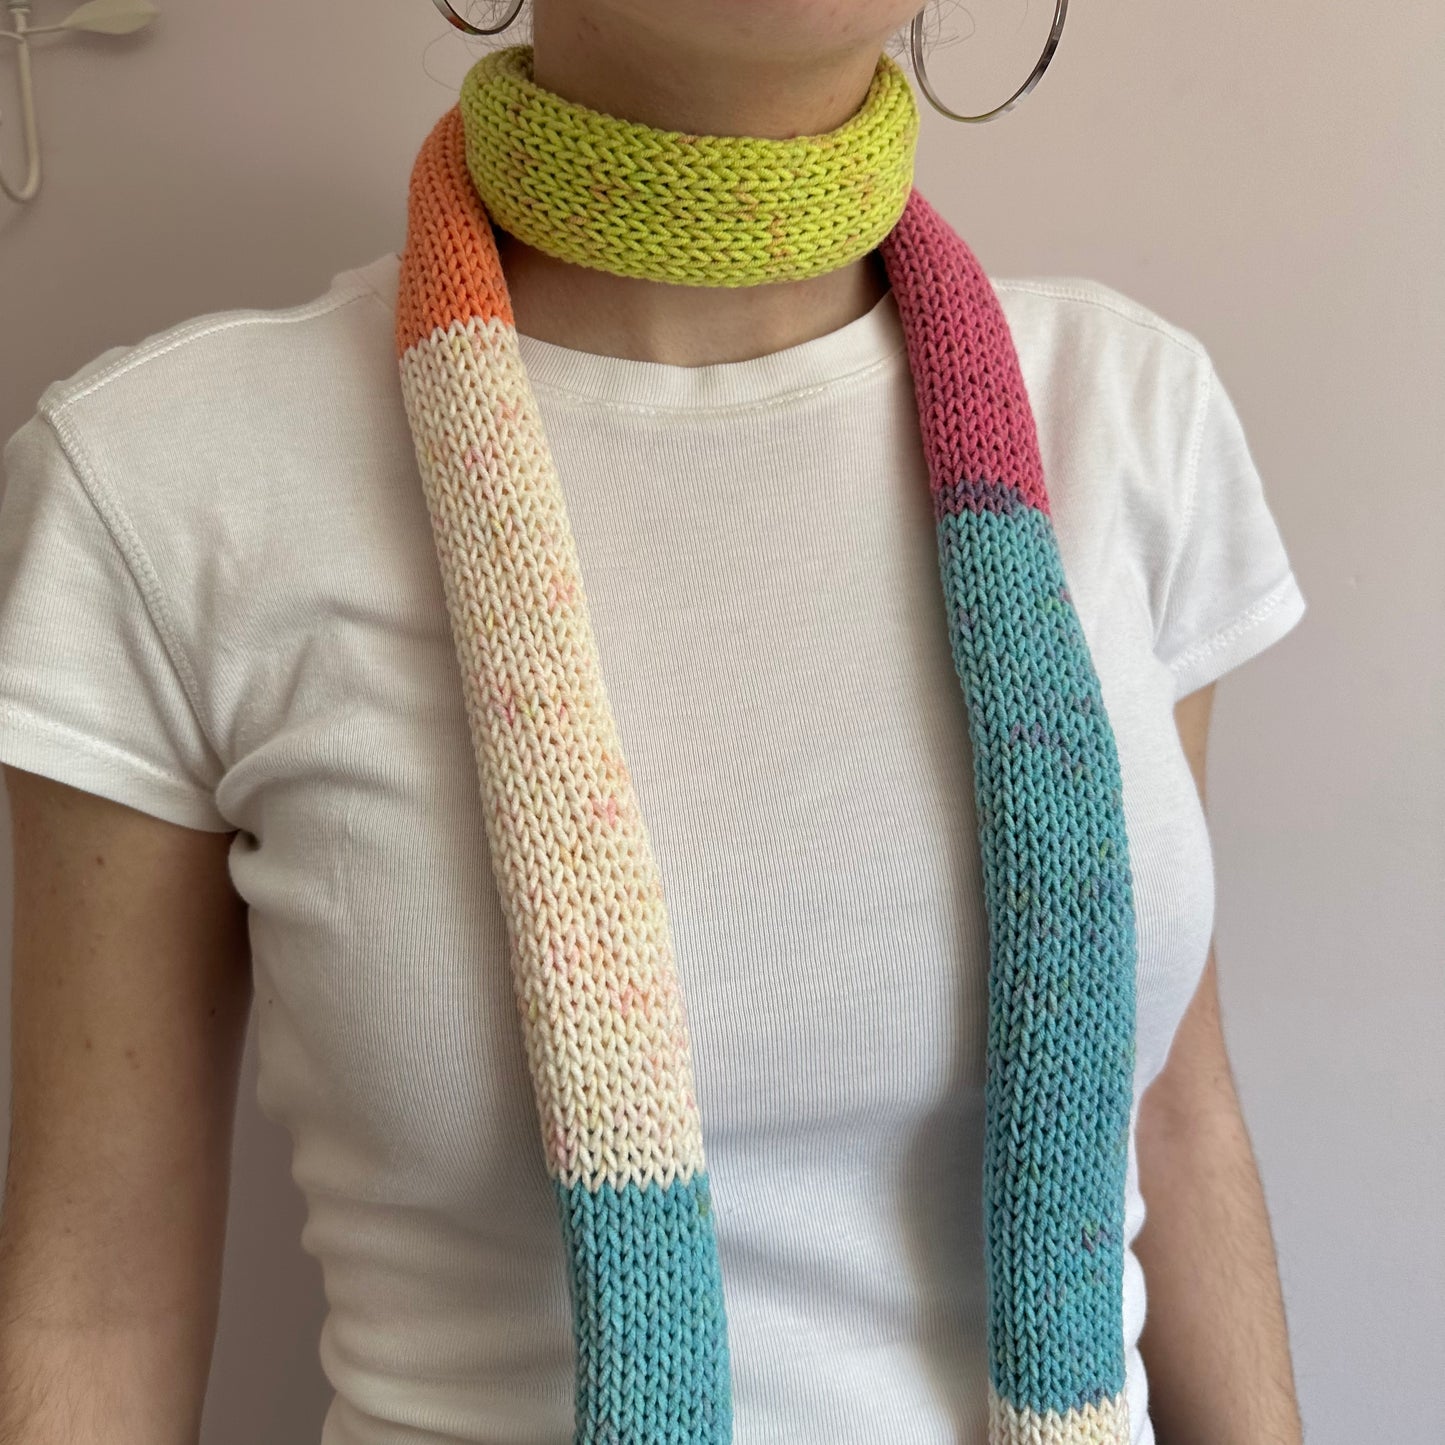 Handmade knitted colour block skinny scarf in blue, cream, orange, pink and green